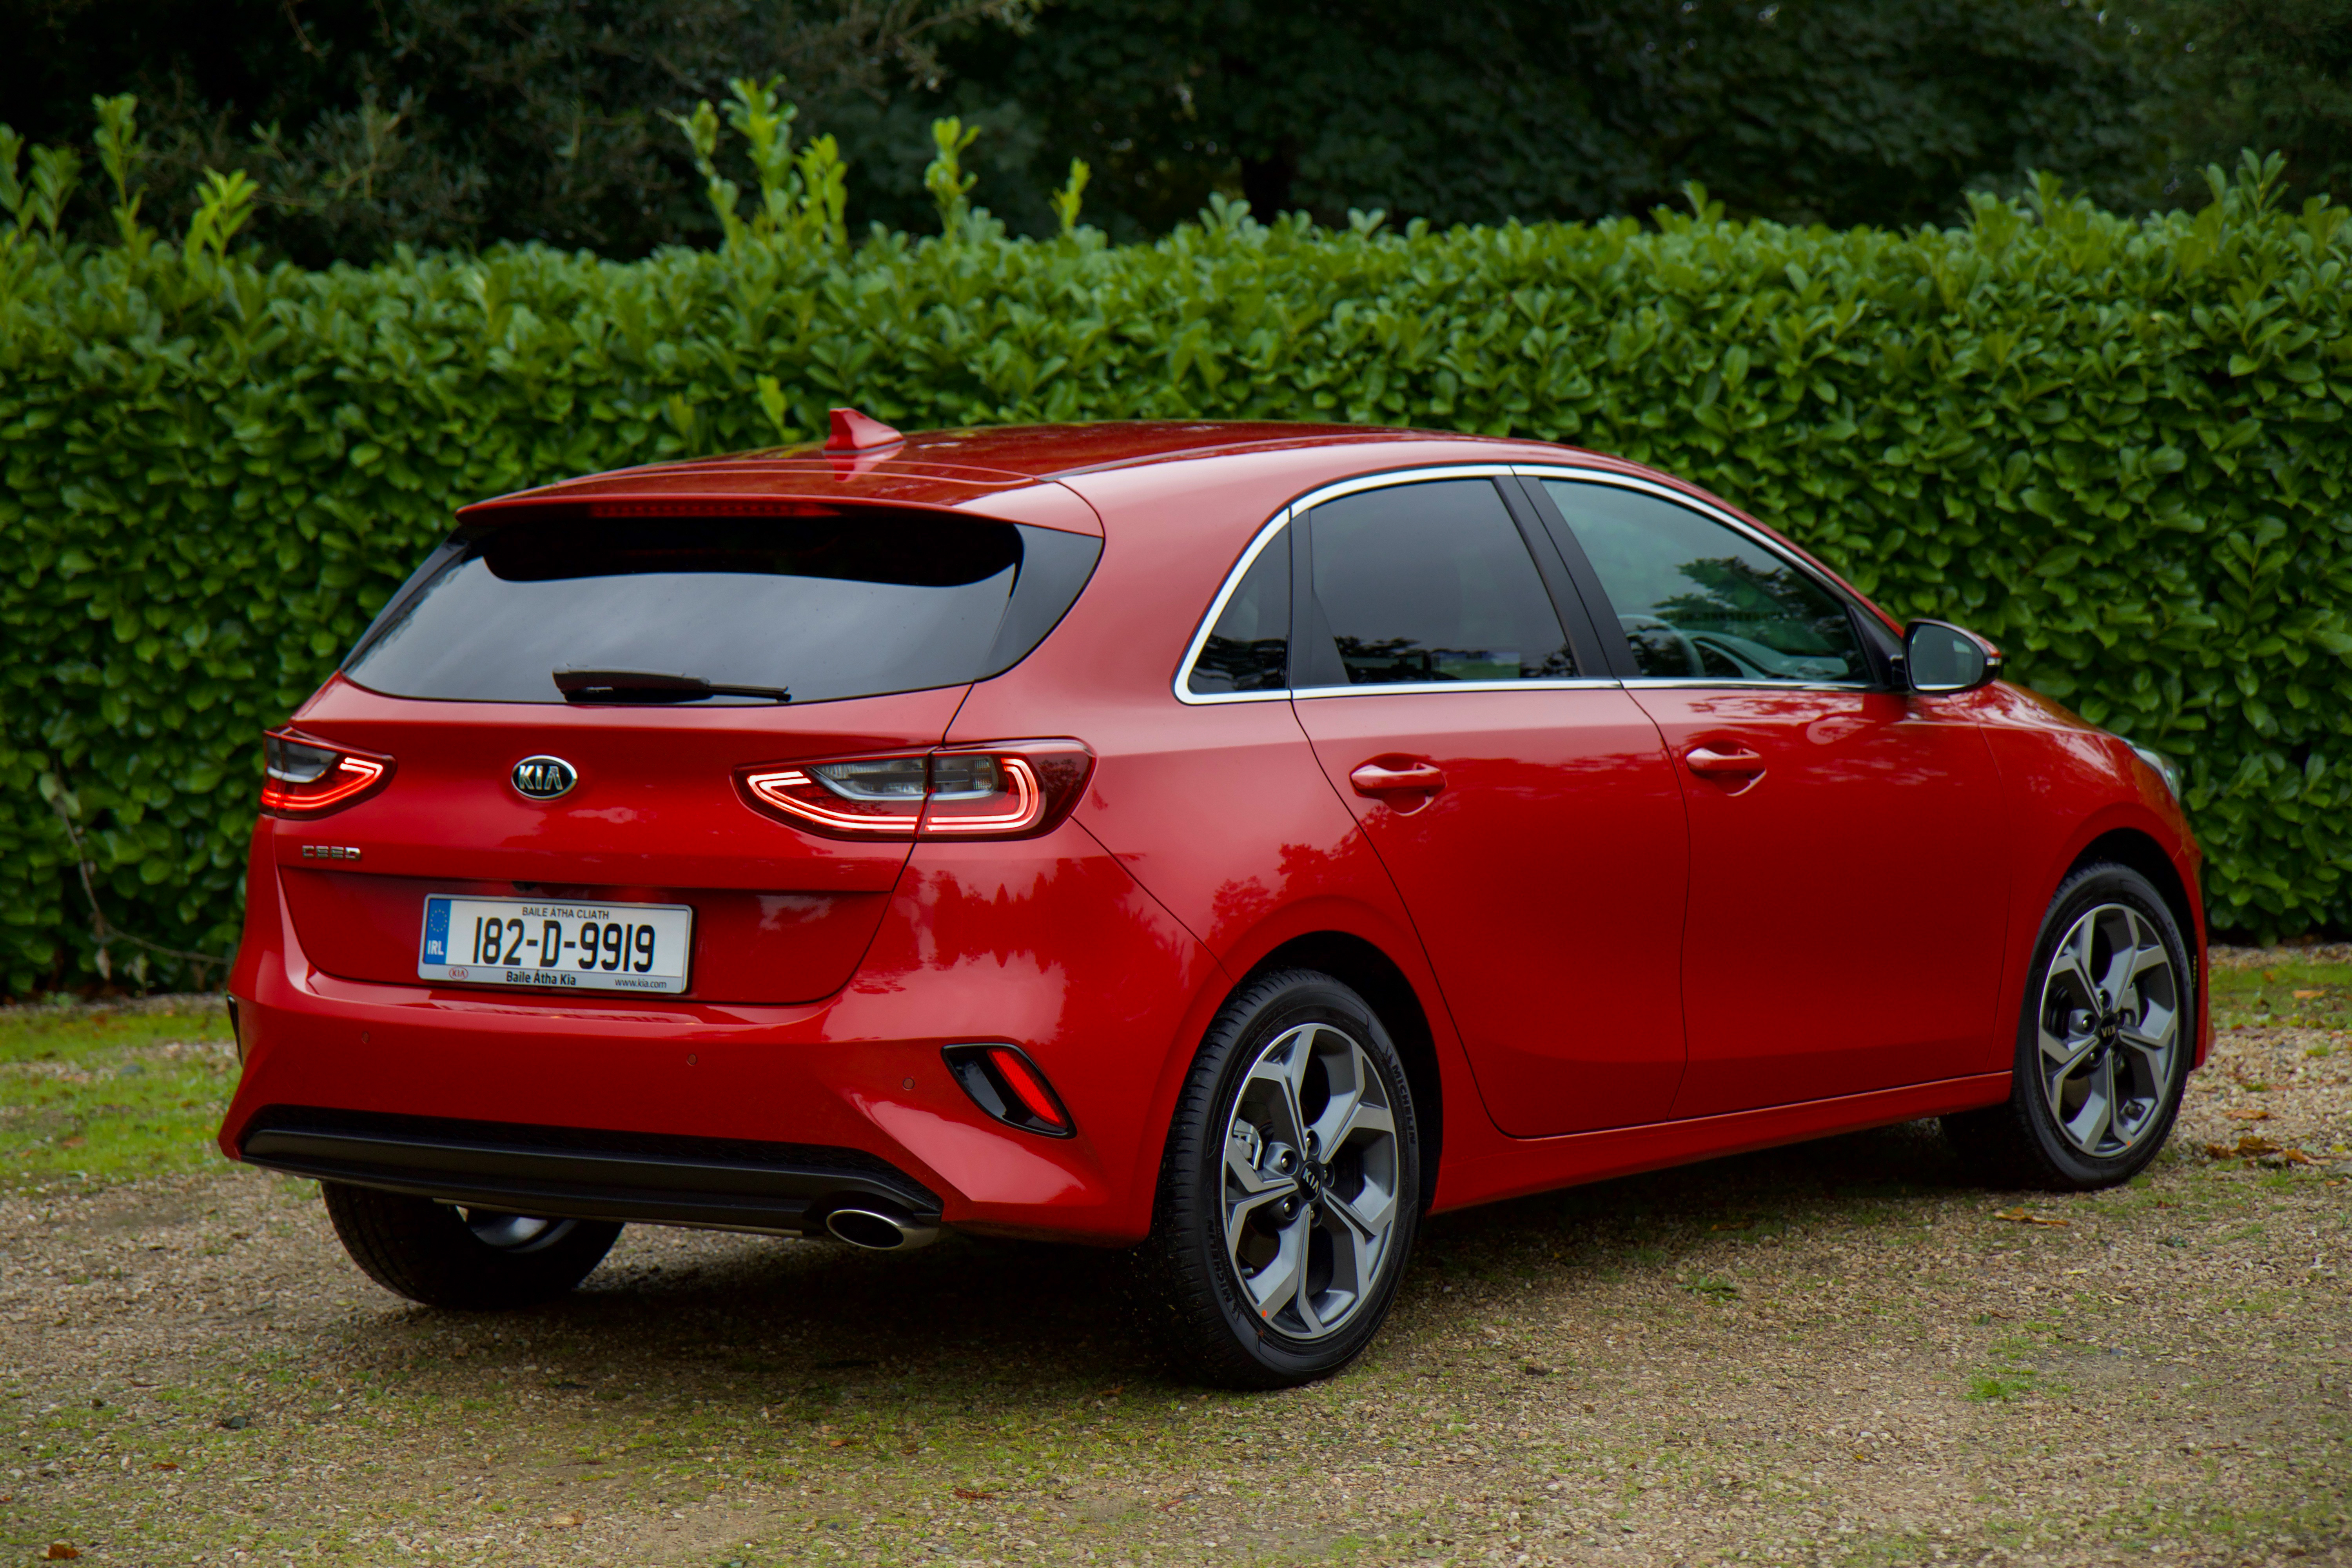 Made in Europe-the all new Kia Ceed